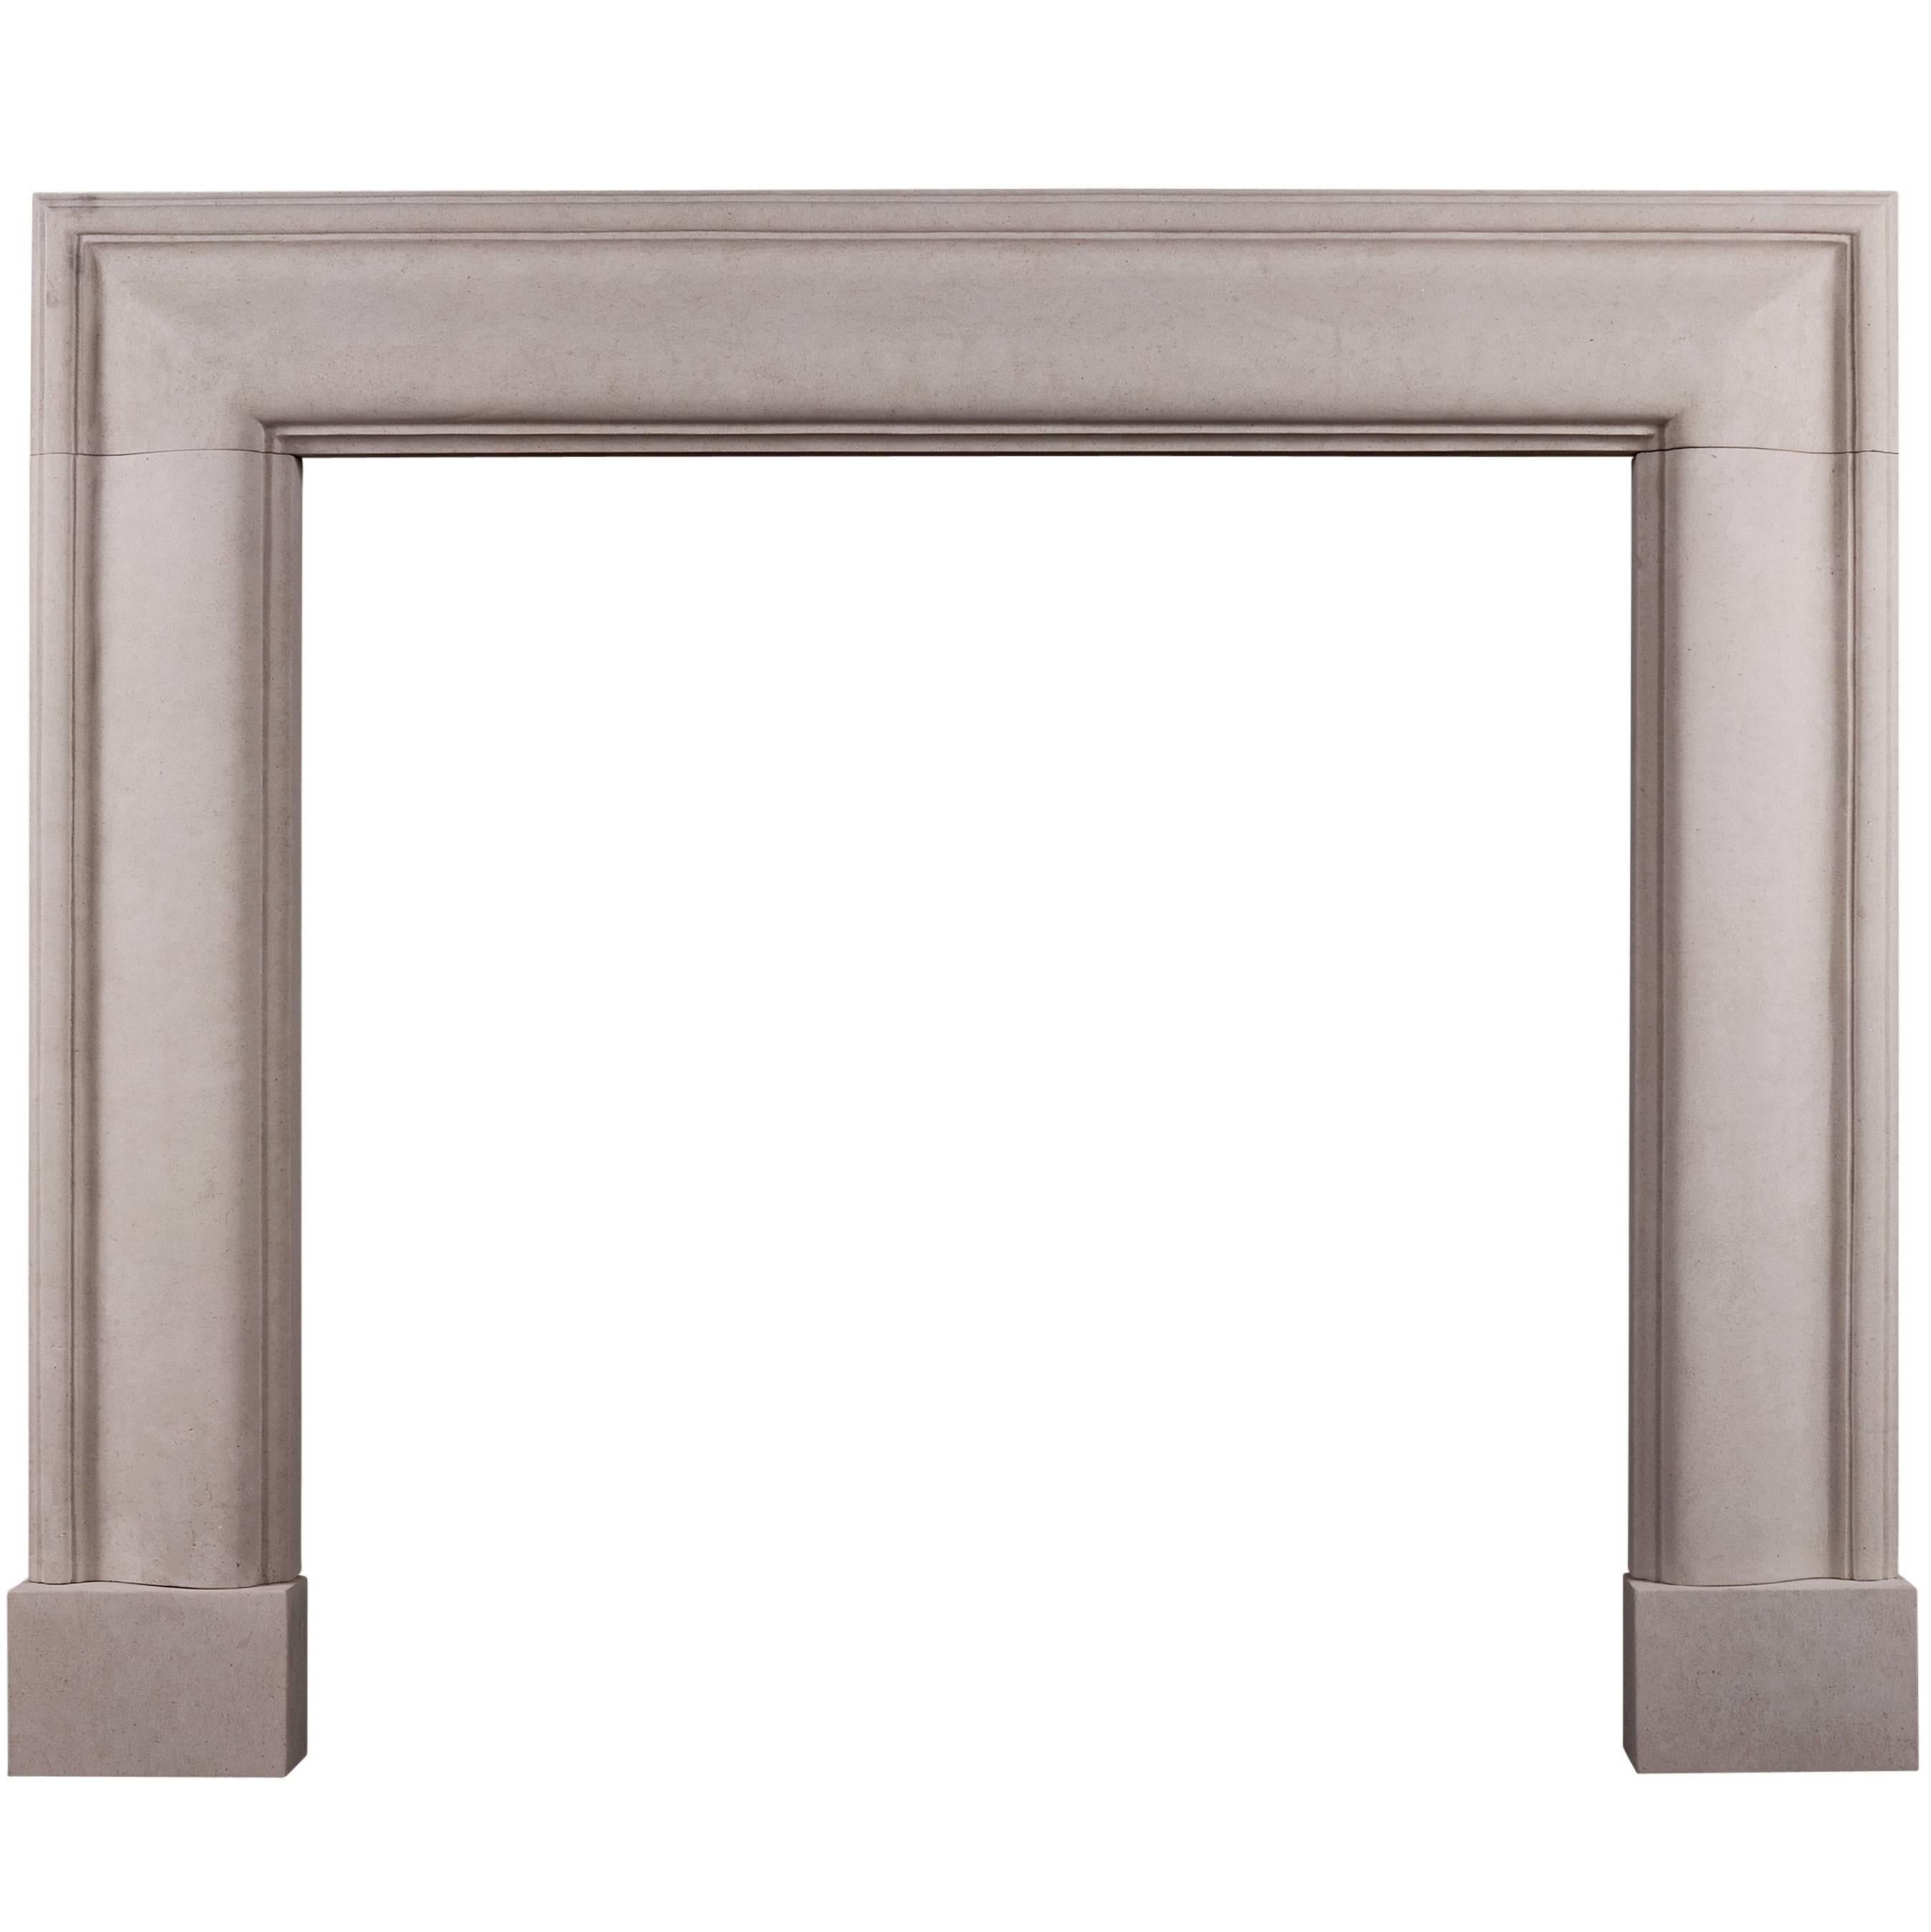 English Moulded Bolection Fireplace in Portland Stone For Sale